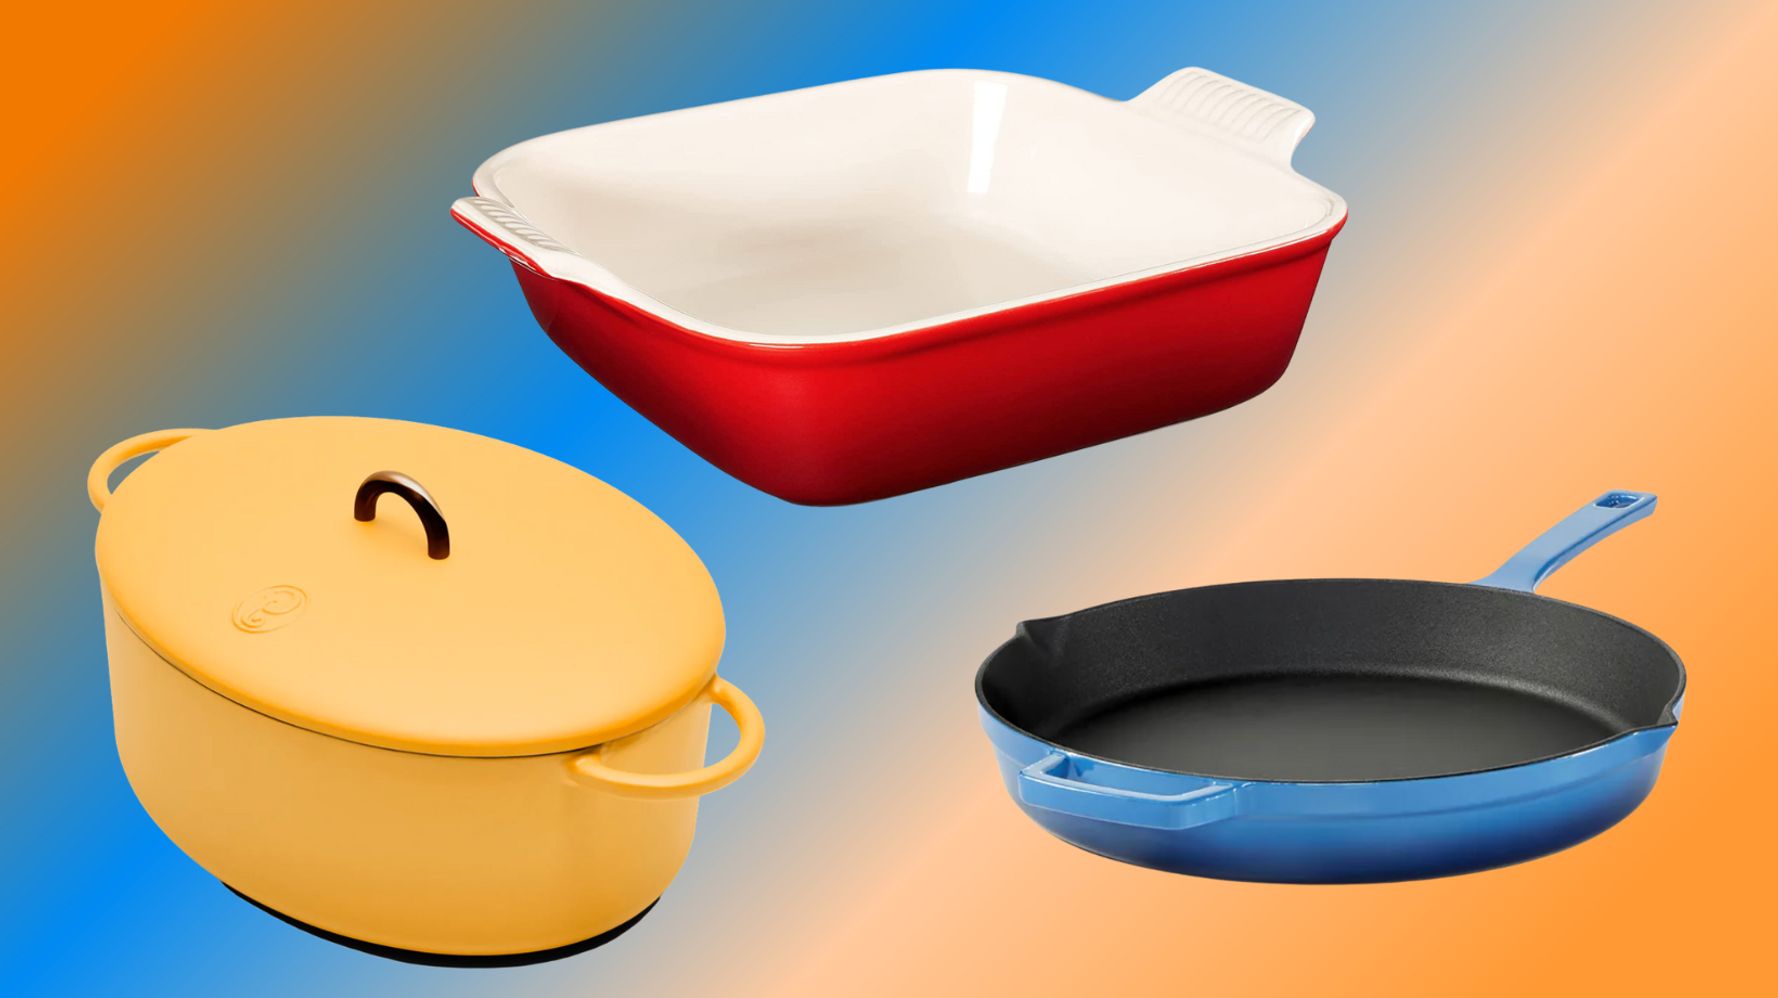 Enameled Cast Iron Cookware: Everything You Need To Know Before You Buy